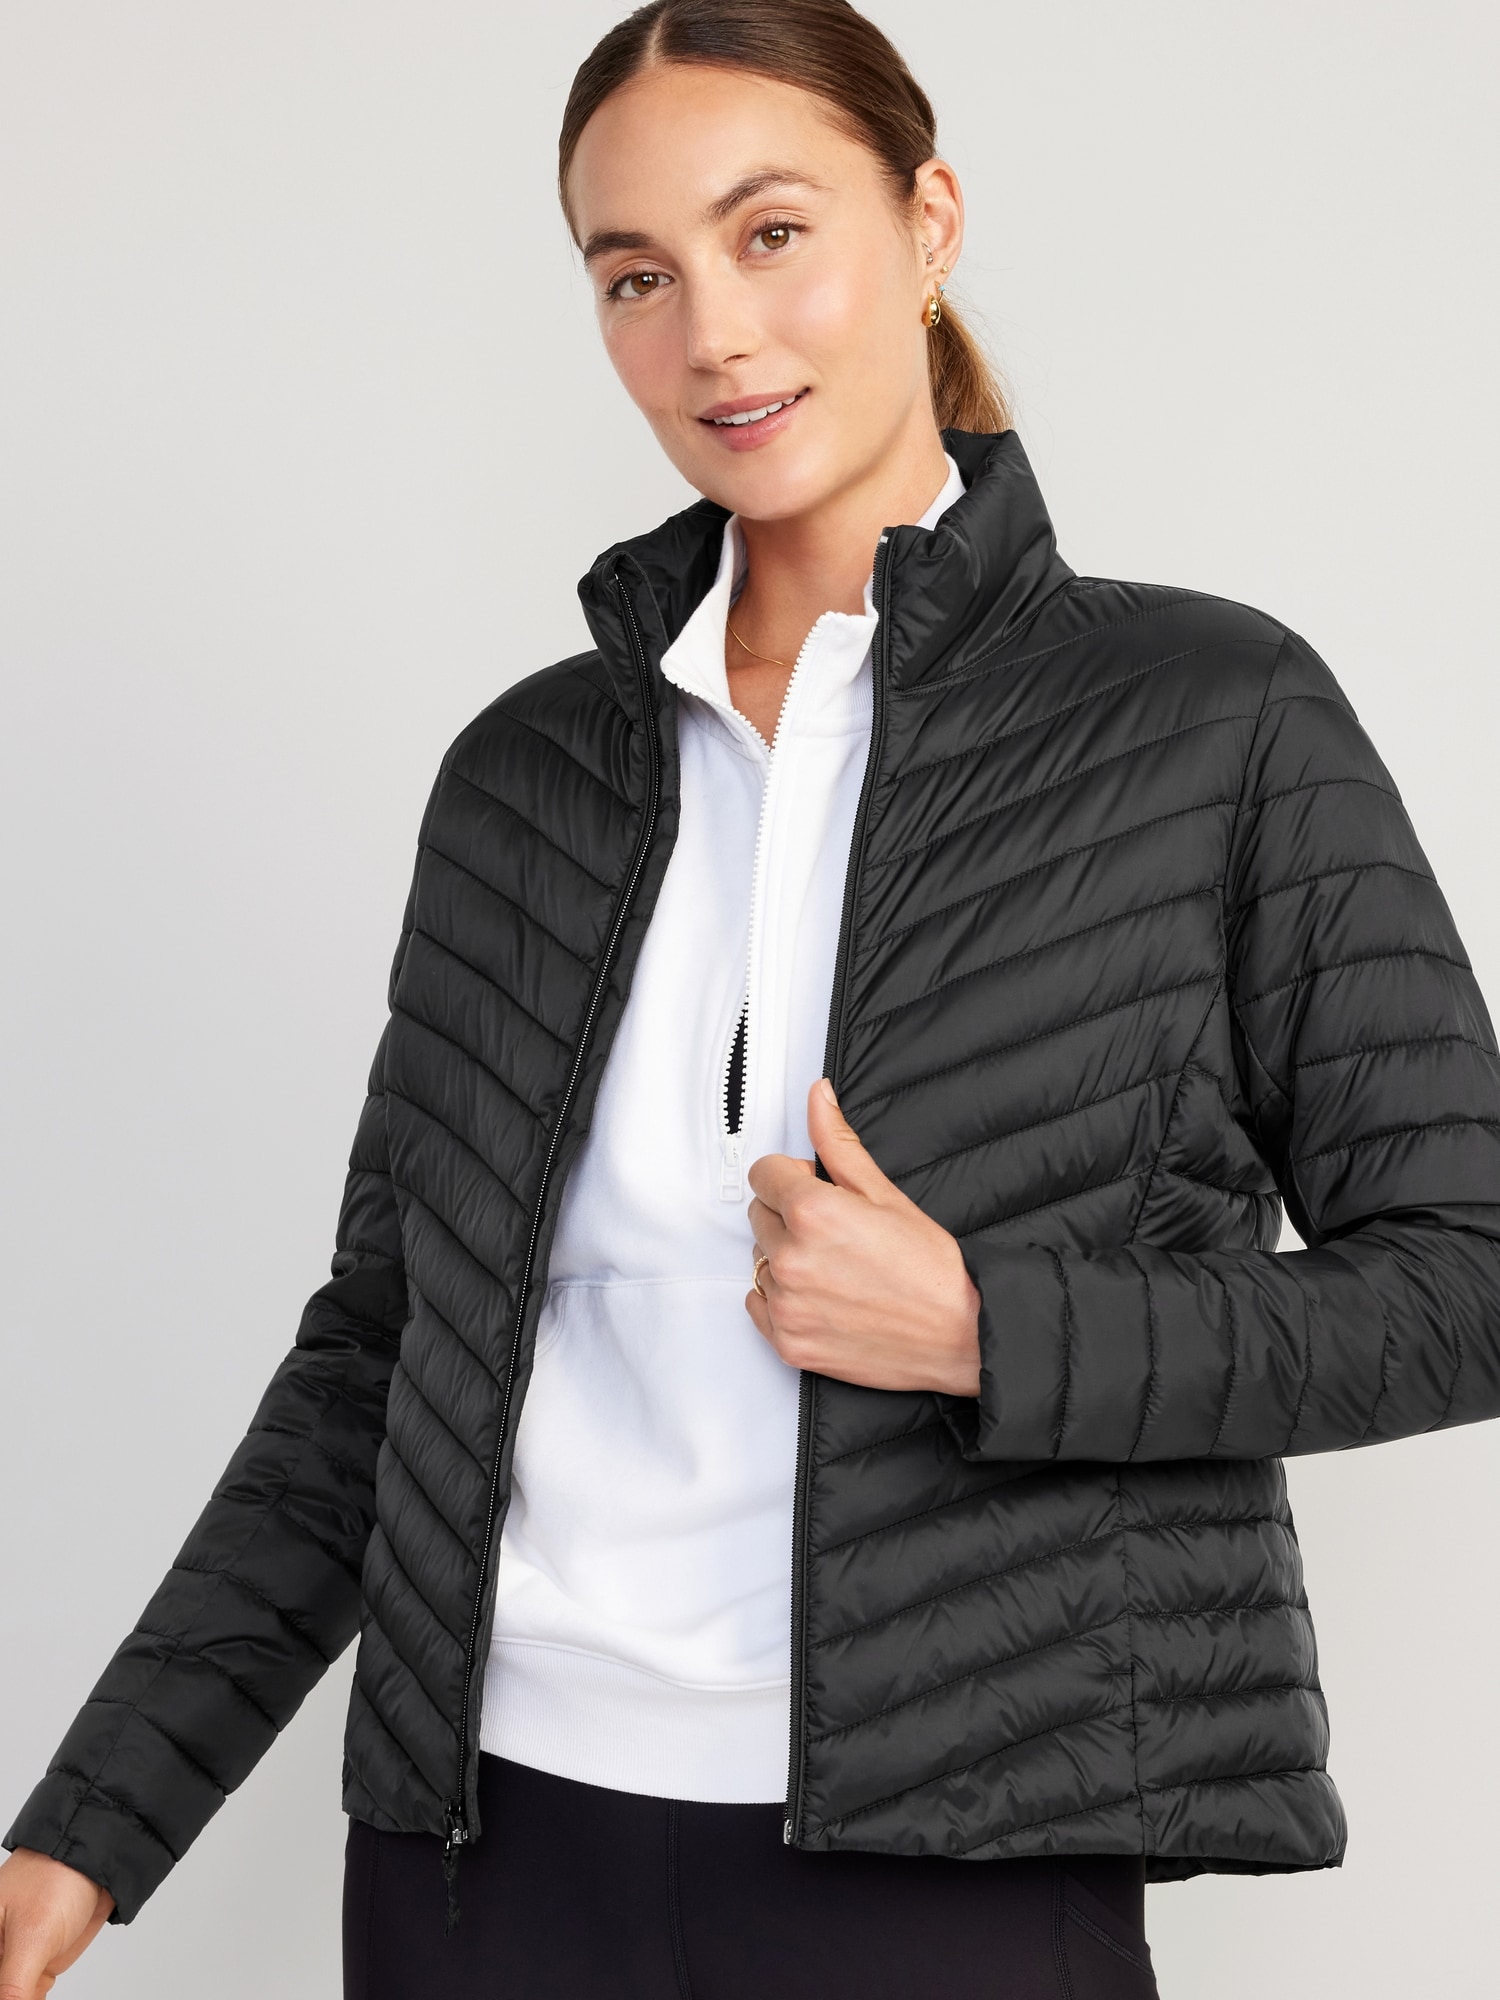 Narrow-Channel Quilted Puffer Jacket